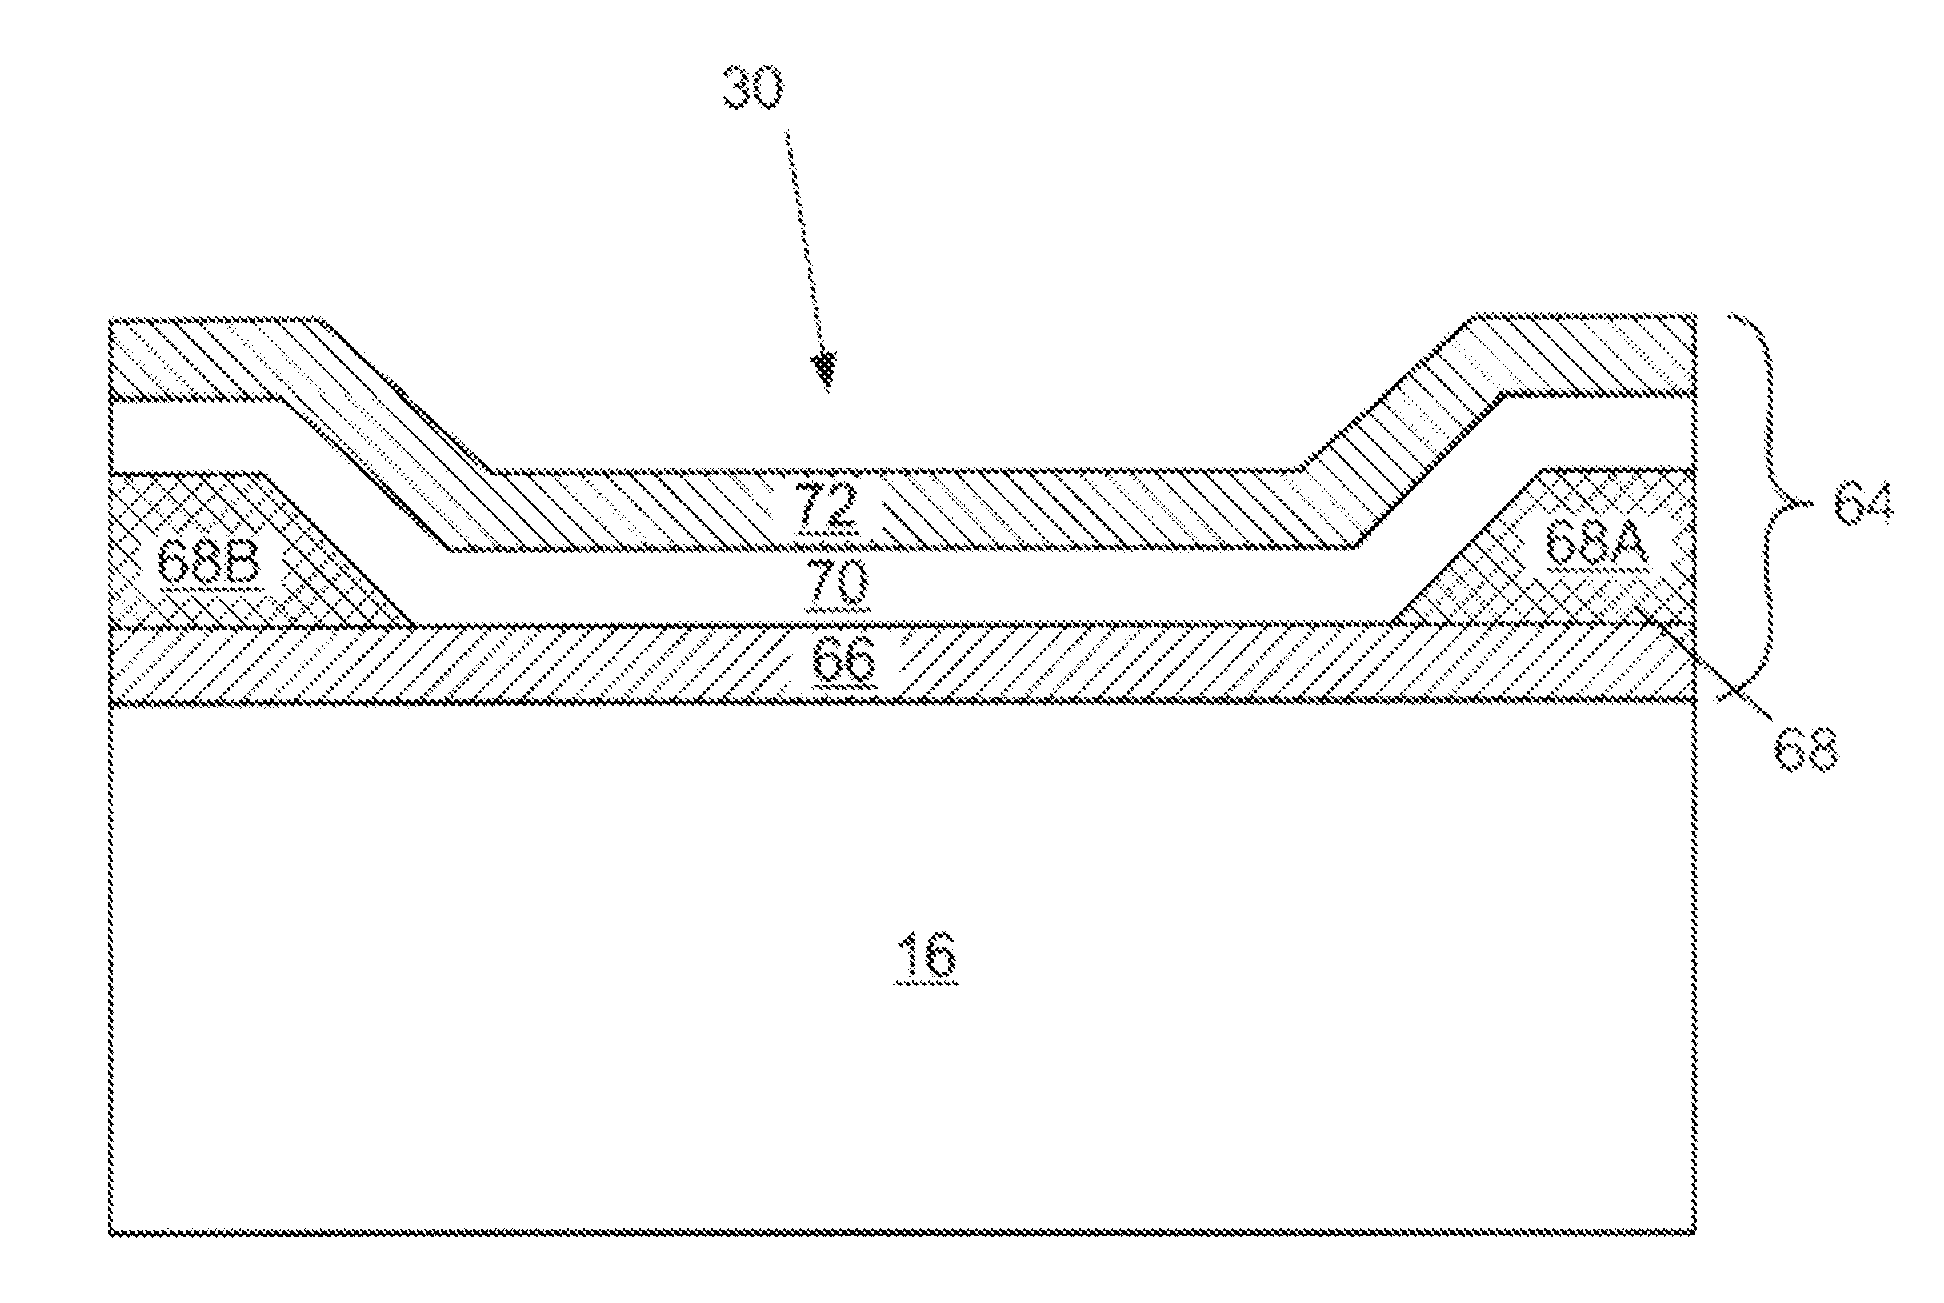 High Resistance Heater Material for A Micro-Fluid Ejection Head